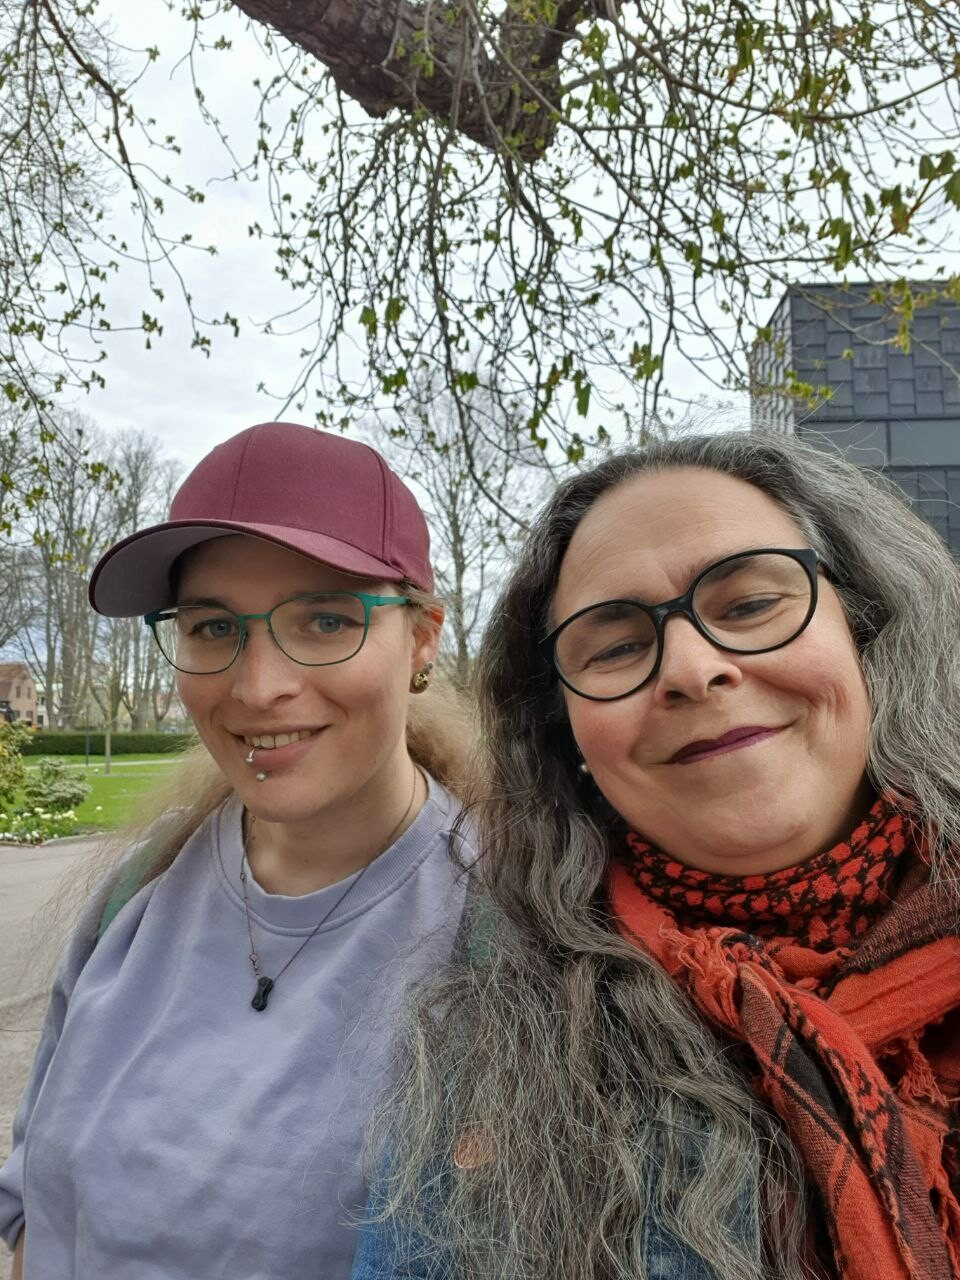 Two people with a background of spring. I'm wearing a light purple sweater and red cap. The other slightly in front of me wearing a red/black scarf and both wearing glasses.